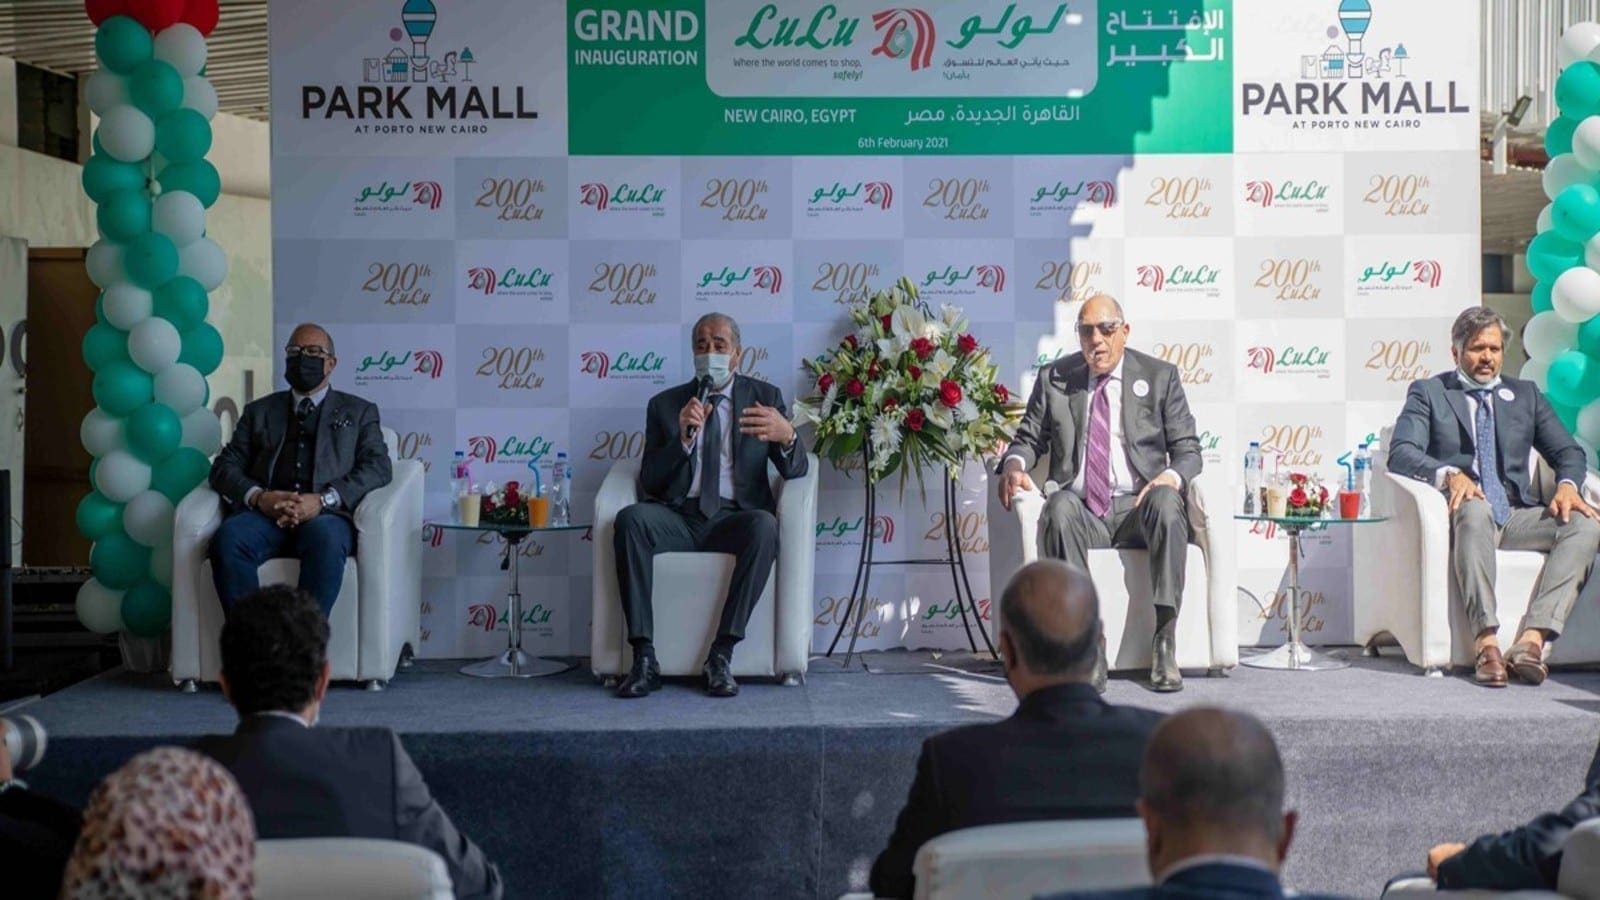 LuLu Group launches 3rd store in Egypt, 200th globally as part of its expansion plan